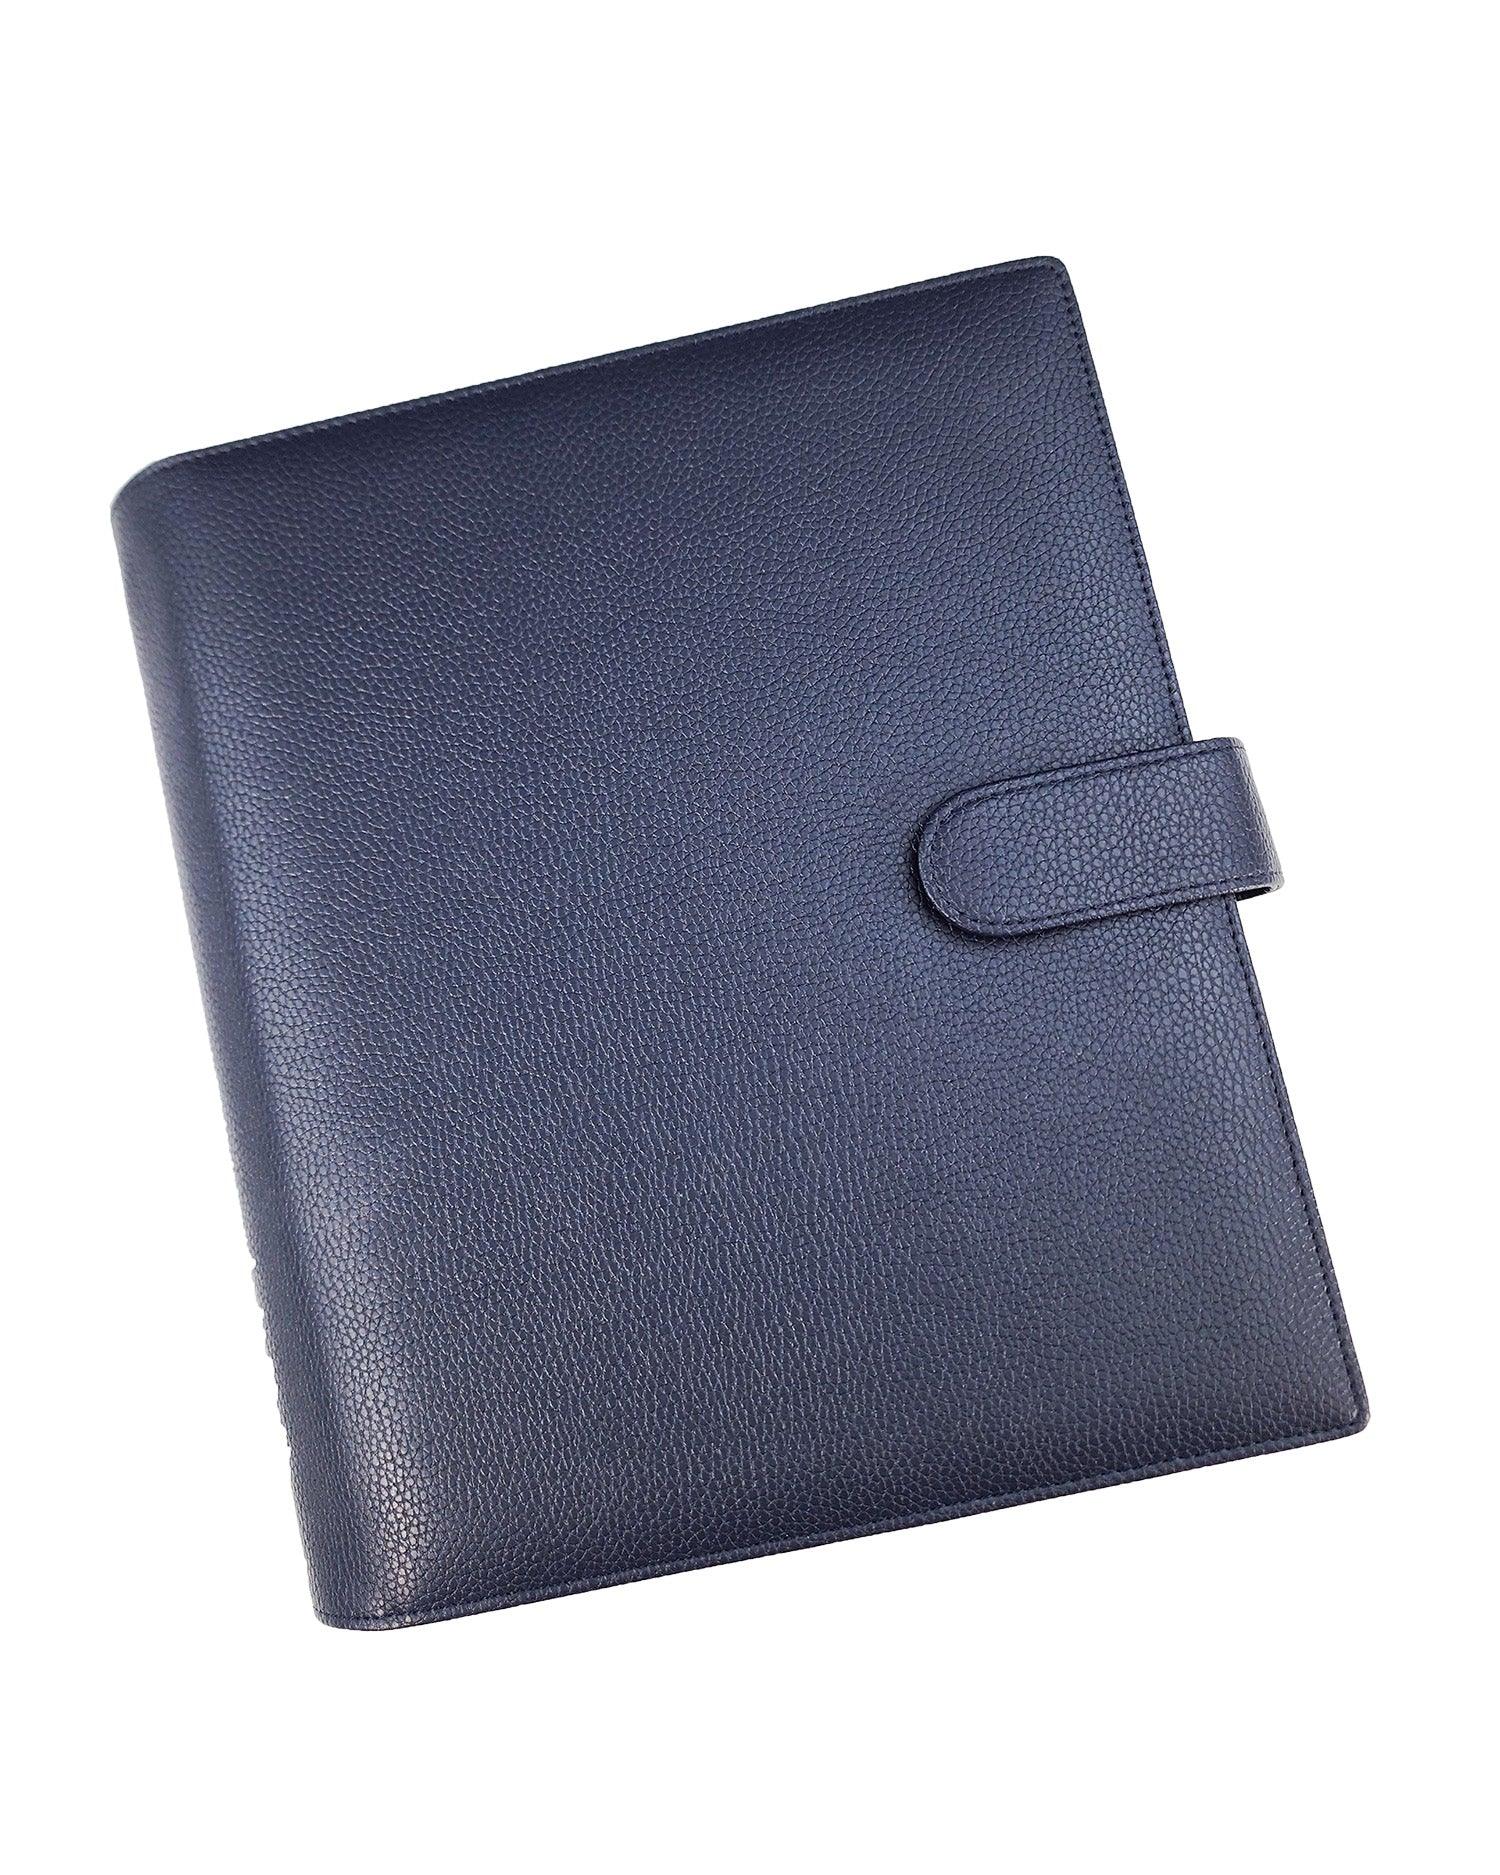 Midnight blue vegan leather wrap around planner cover for discbound planners by Jane's Agenda.